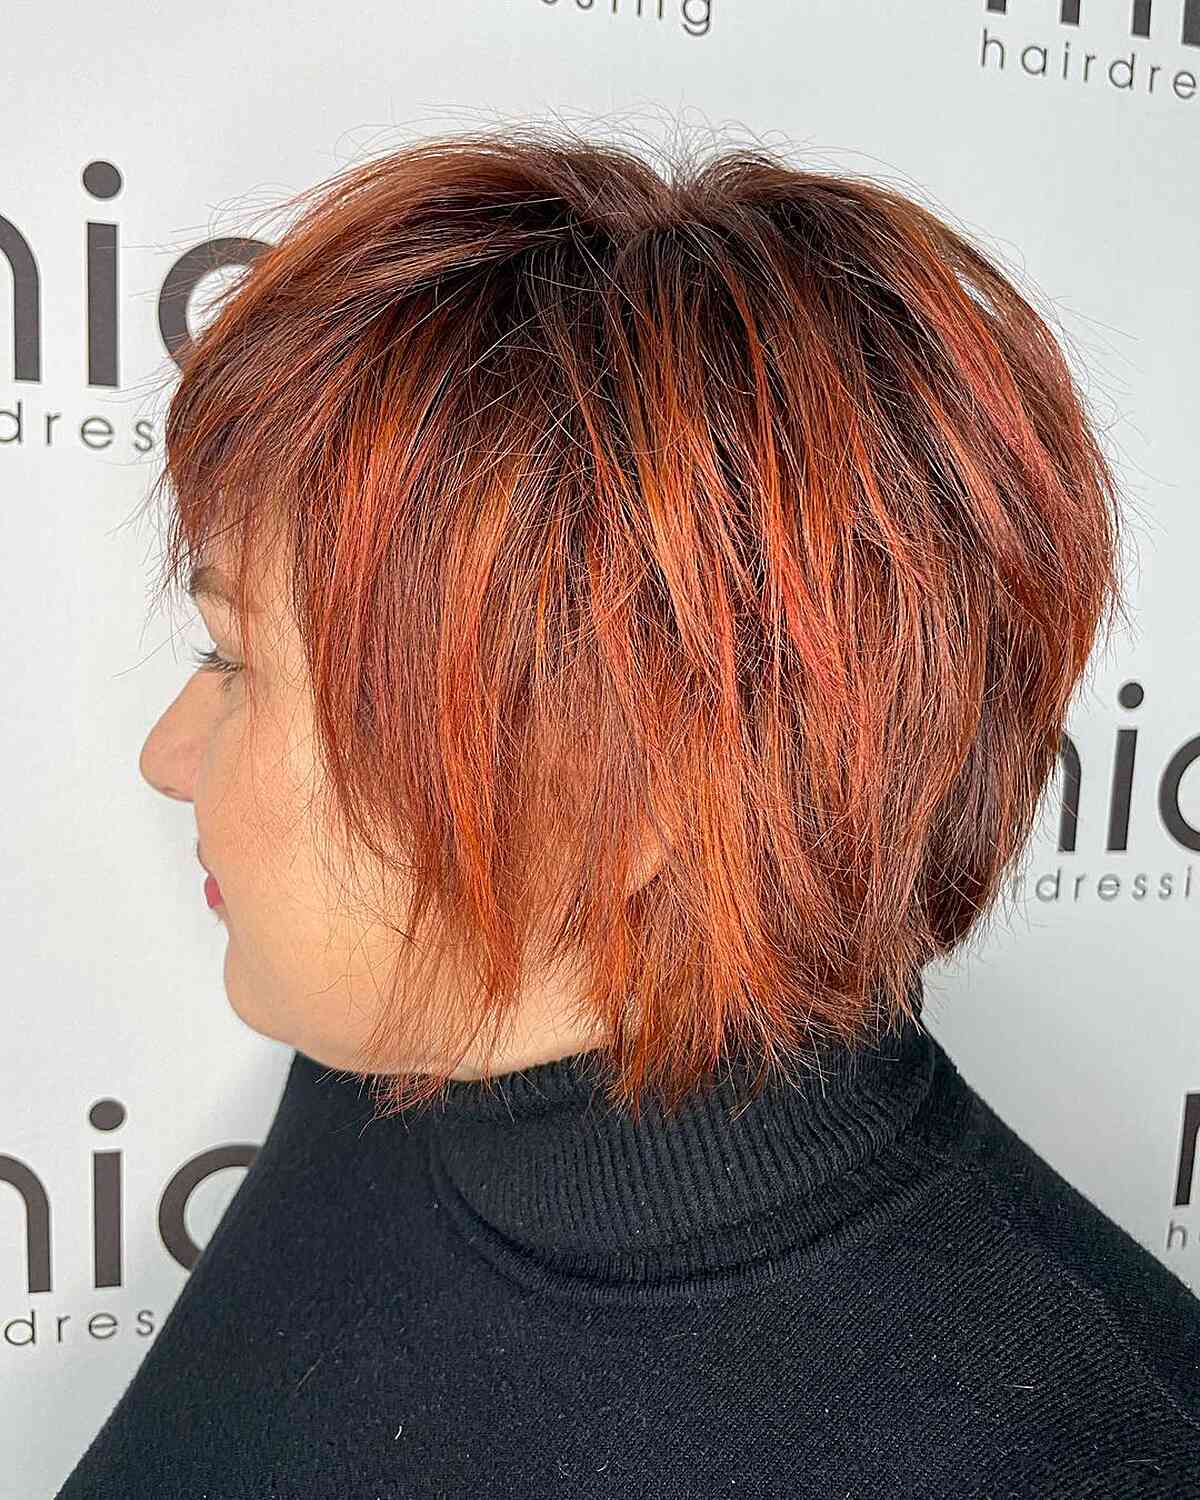 Chin-Length Short Copper Shag with Piece-y Layers